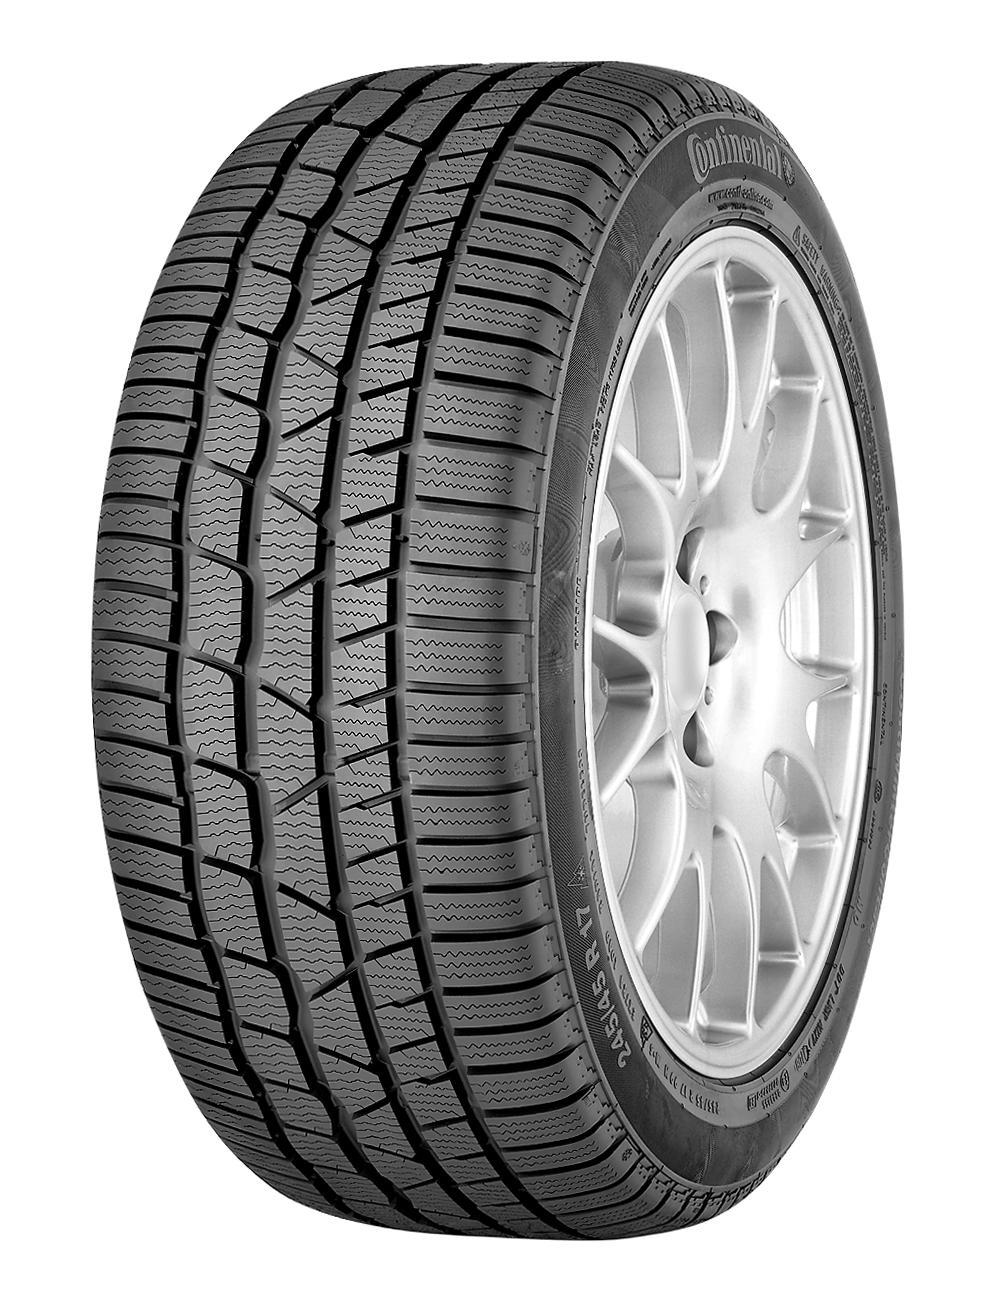 Anvelope iarna CONTINENTAL WINTER CONTACT TS830 P (*) 205/55 R18 96H